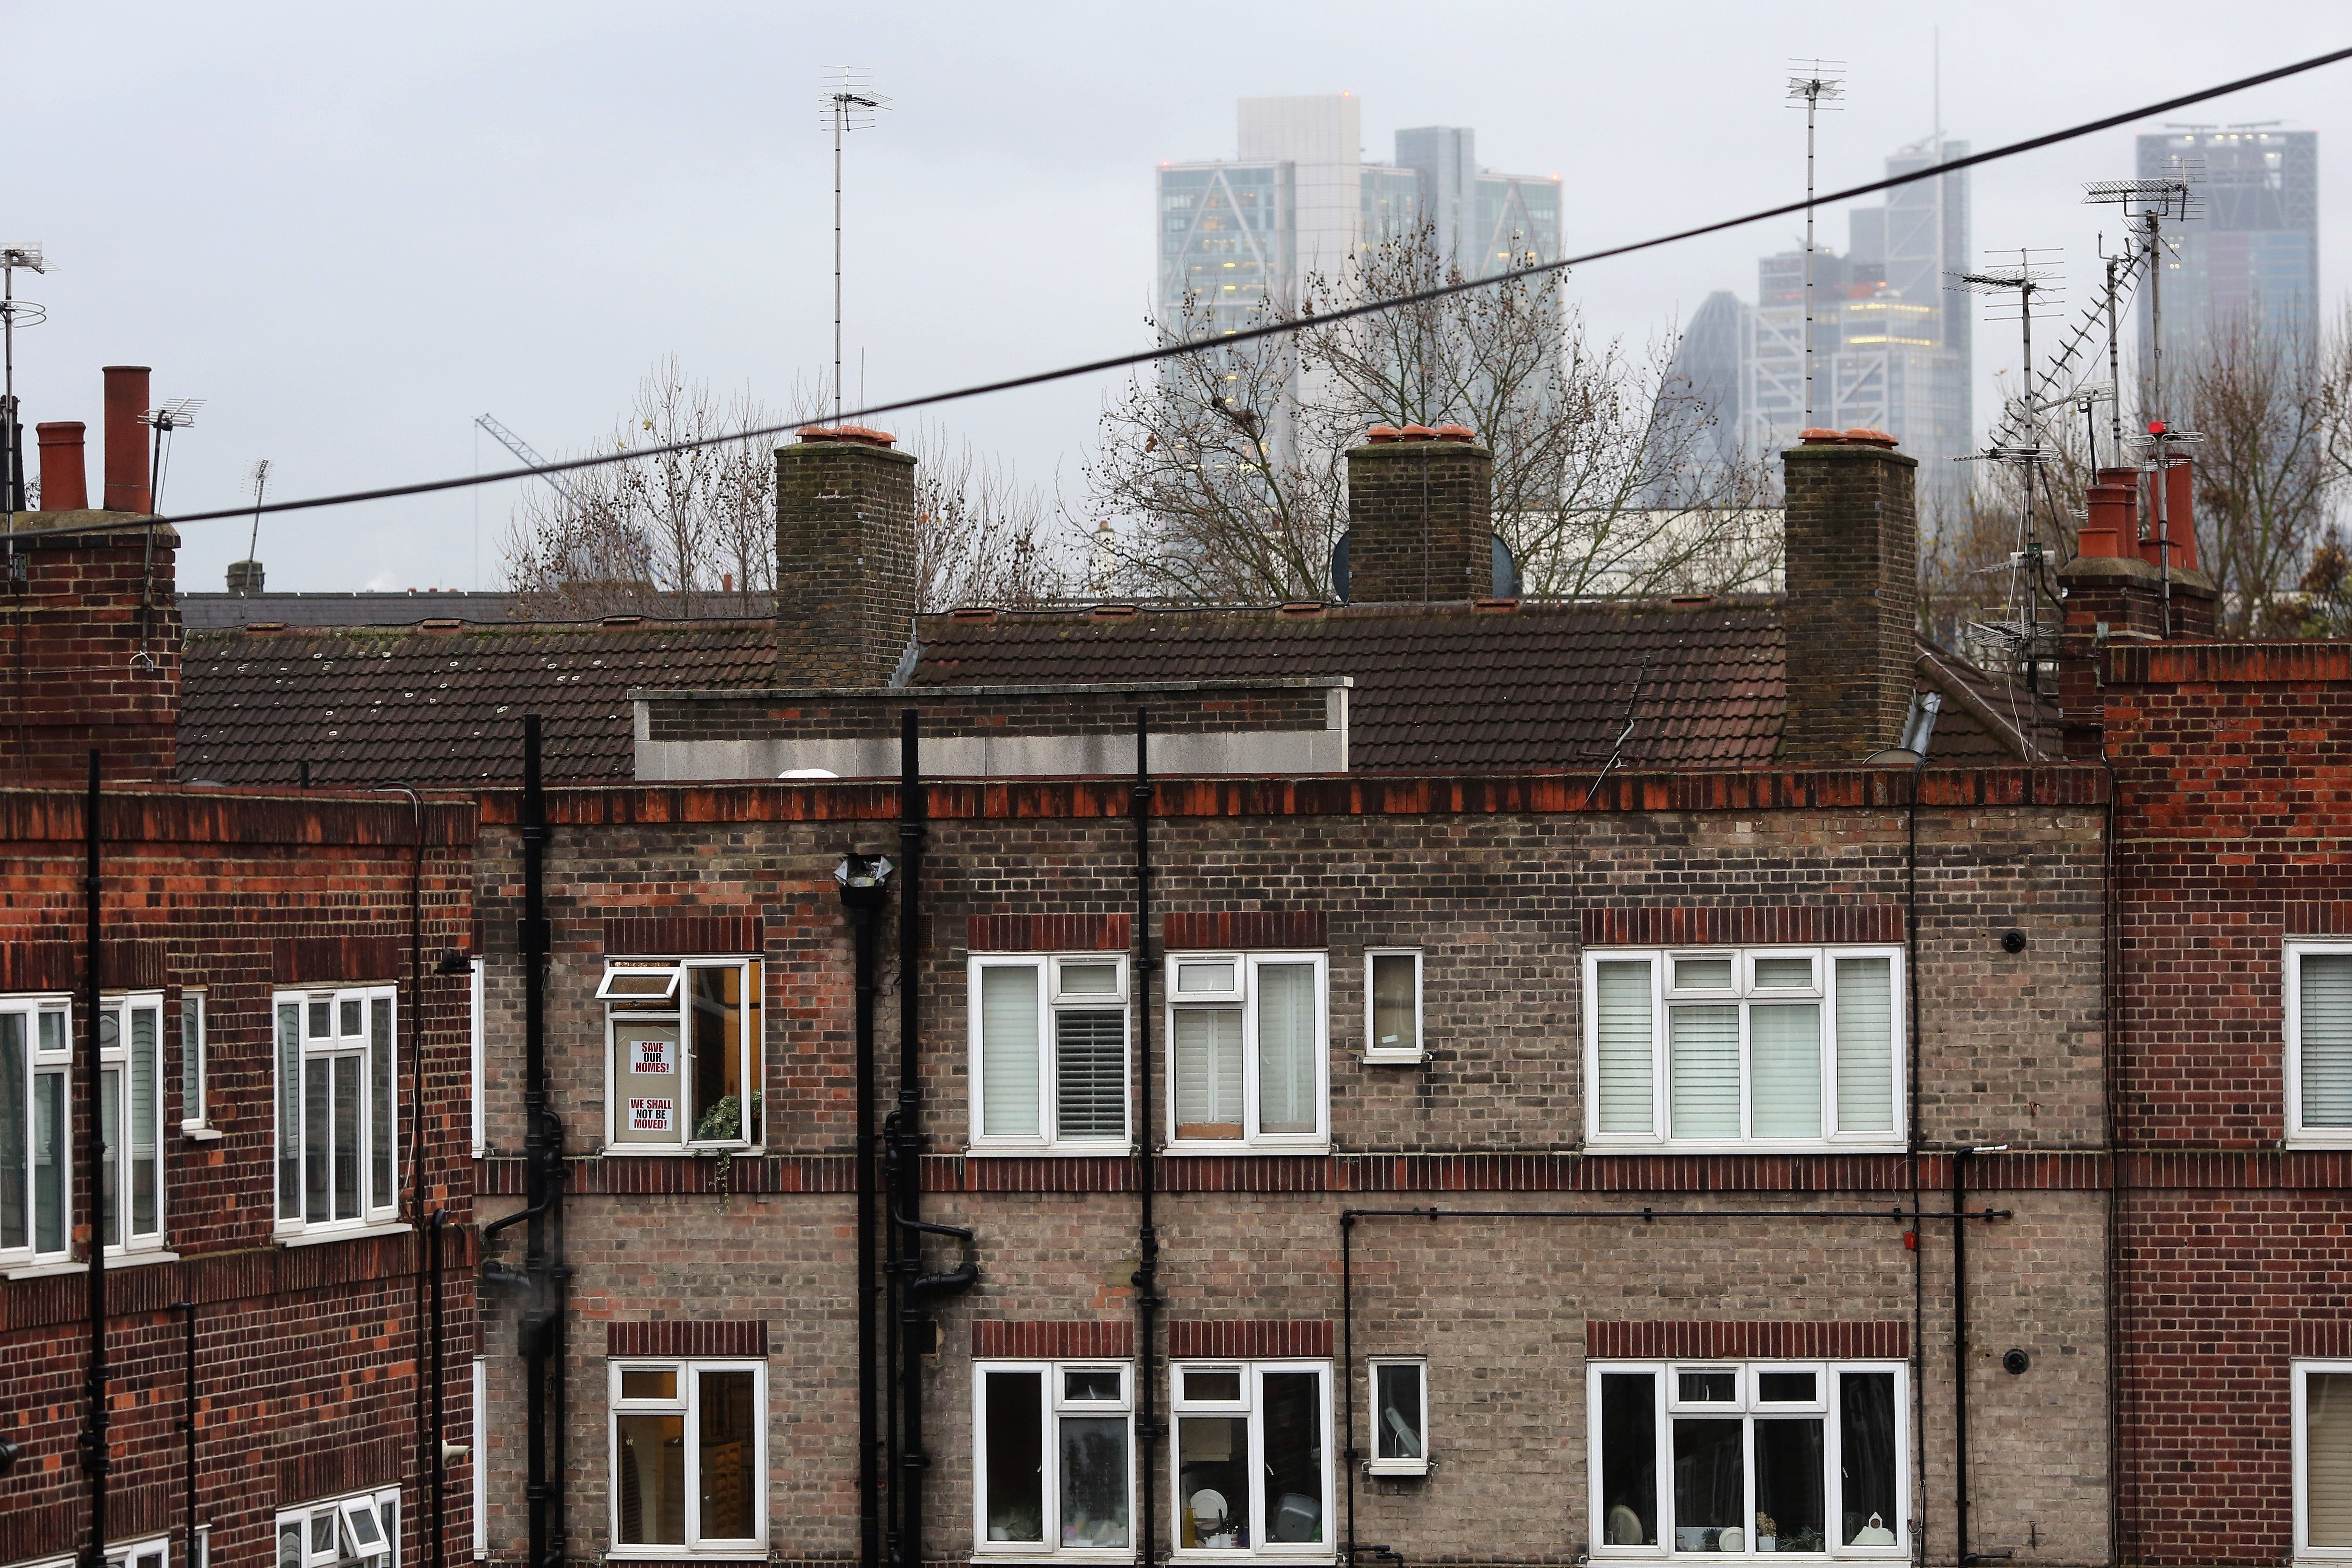 The New Era housing estate in east London